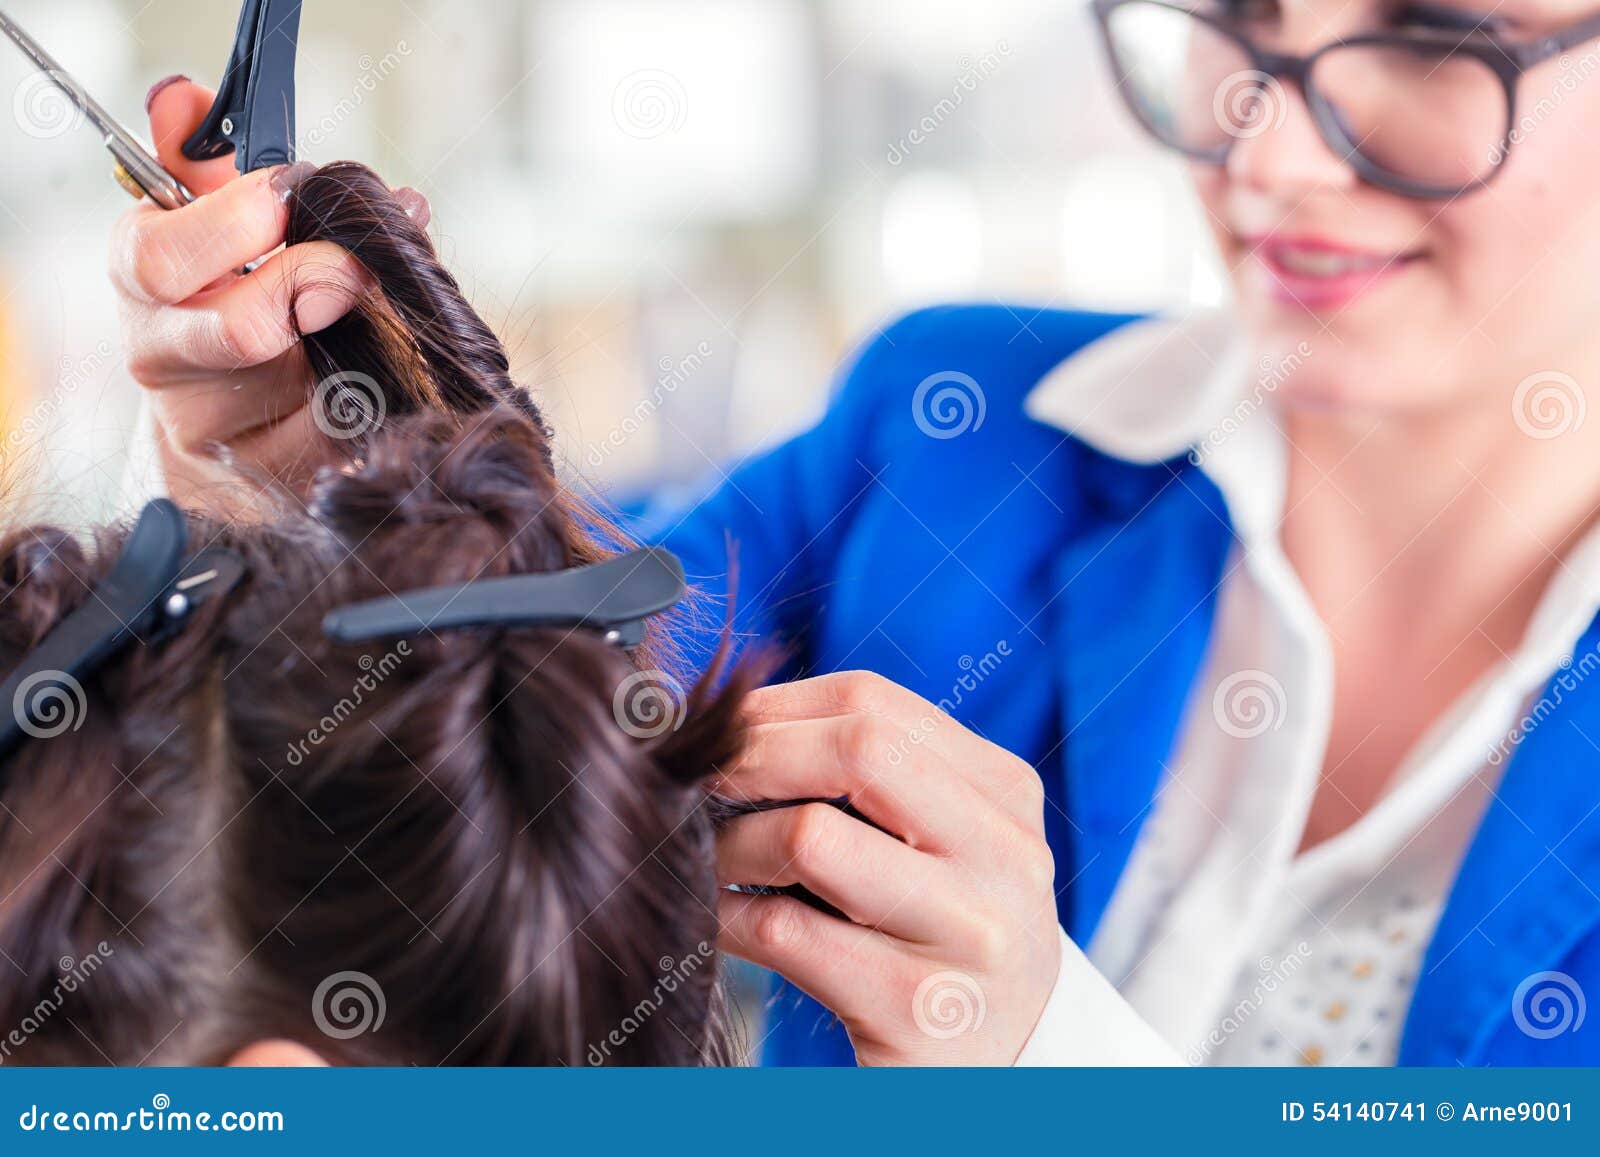 Hairdresser Styling Woman Hair In Shop Stock Image Image Of